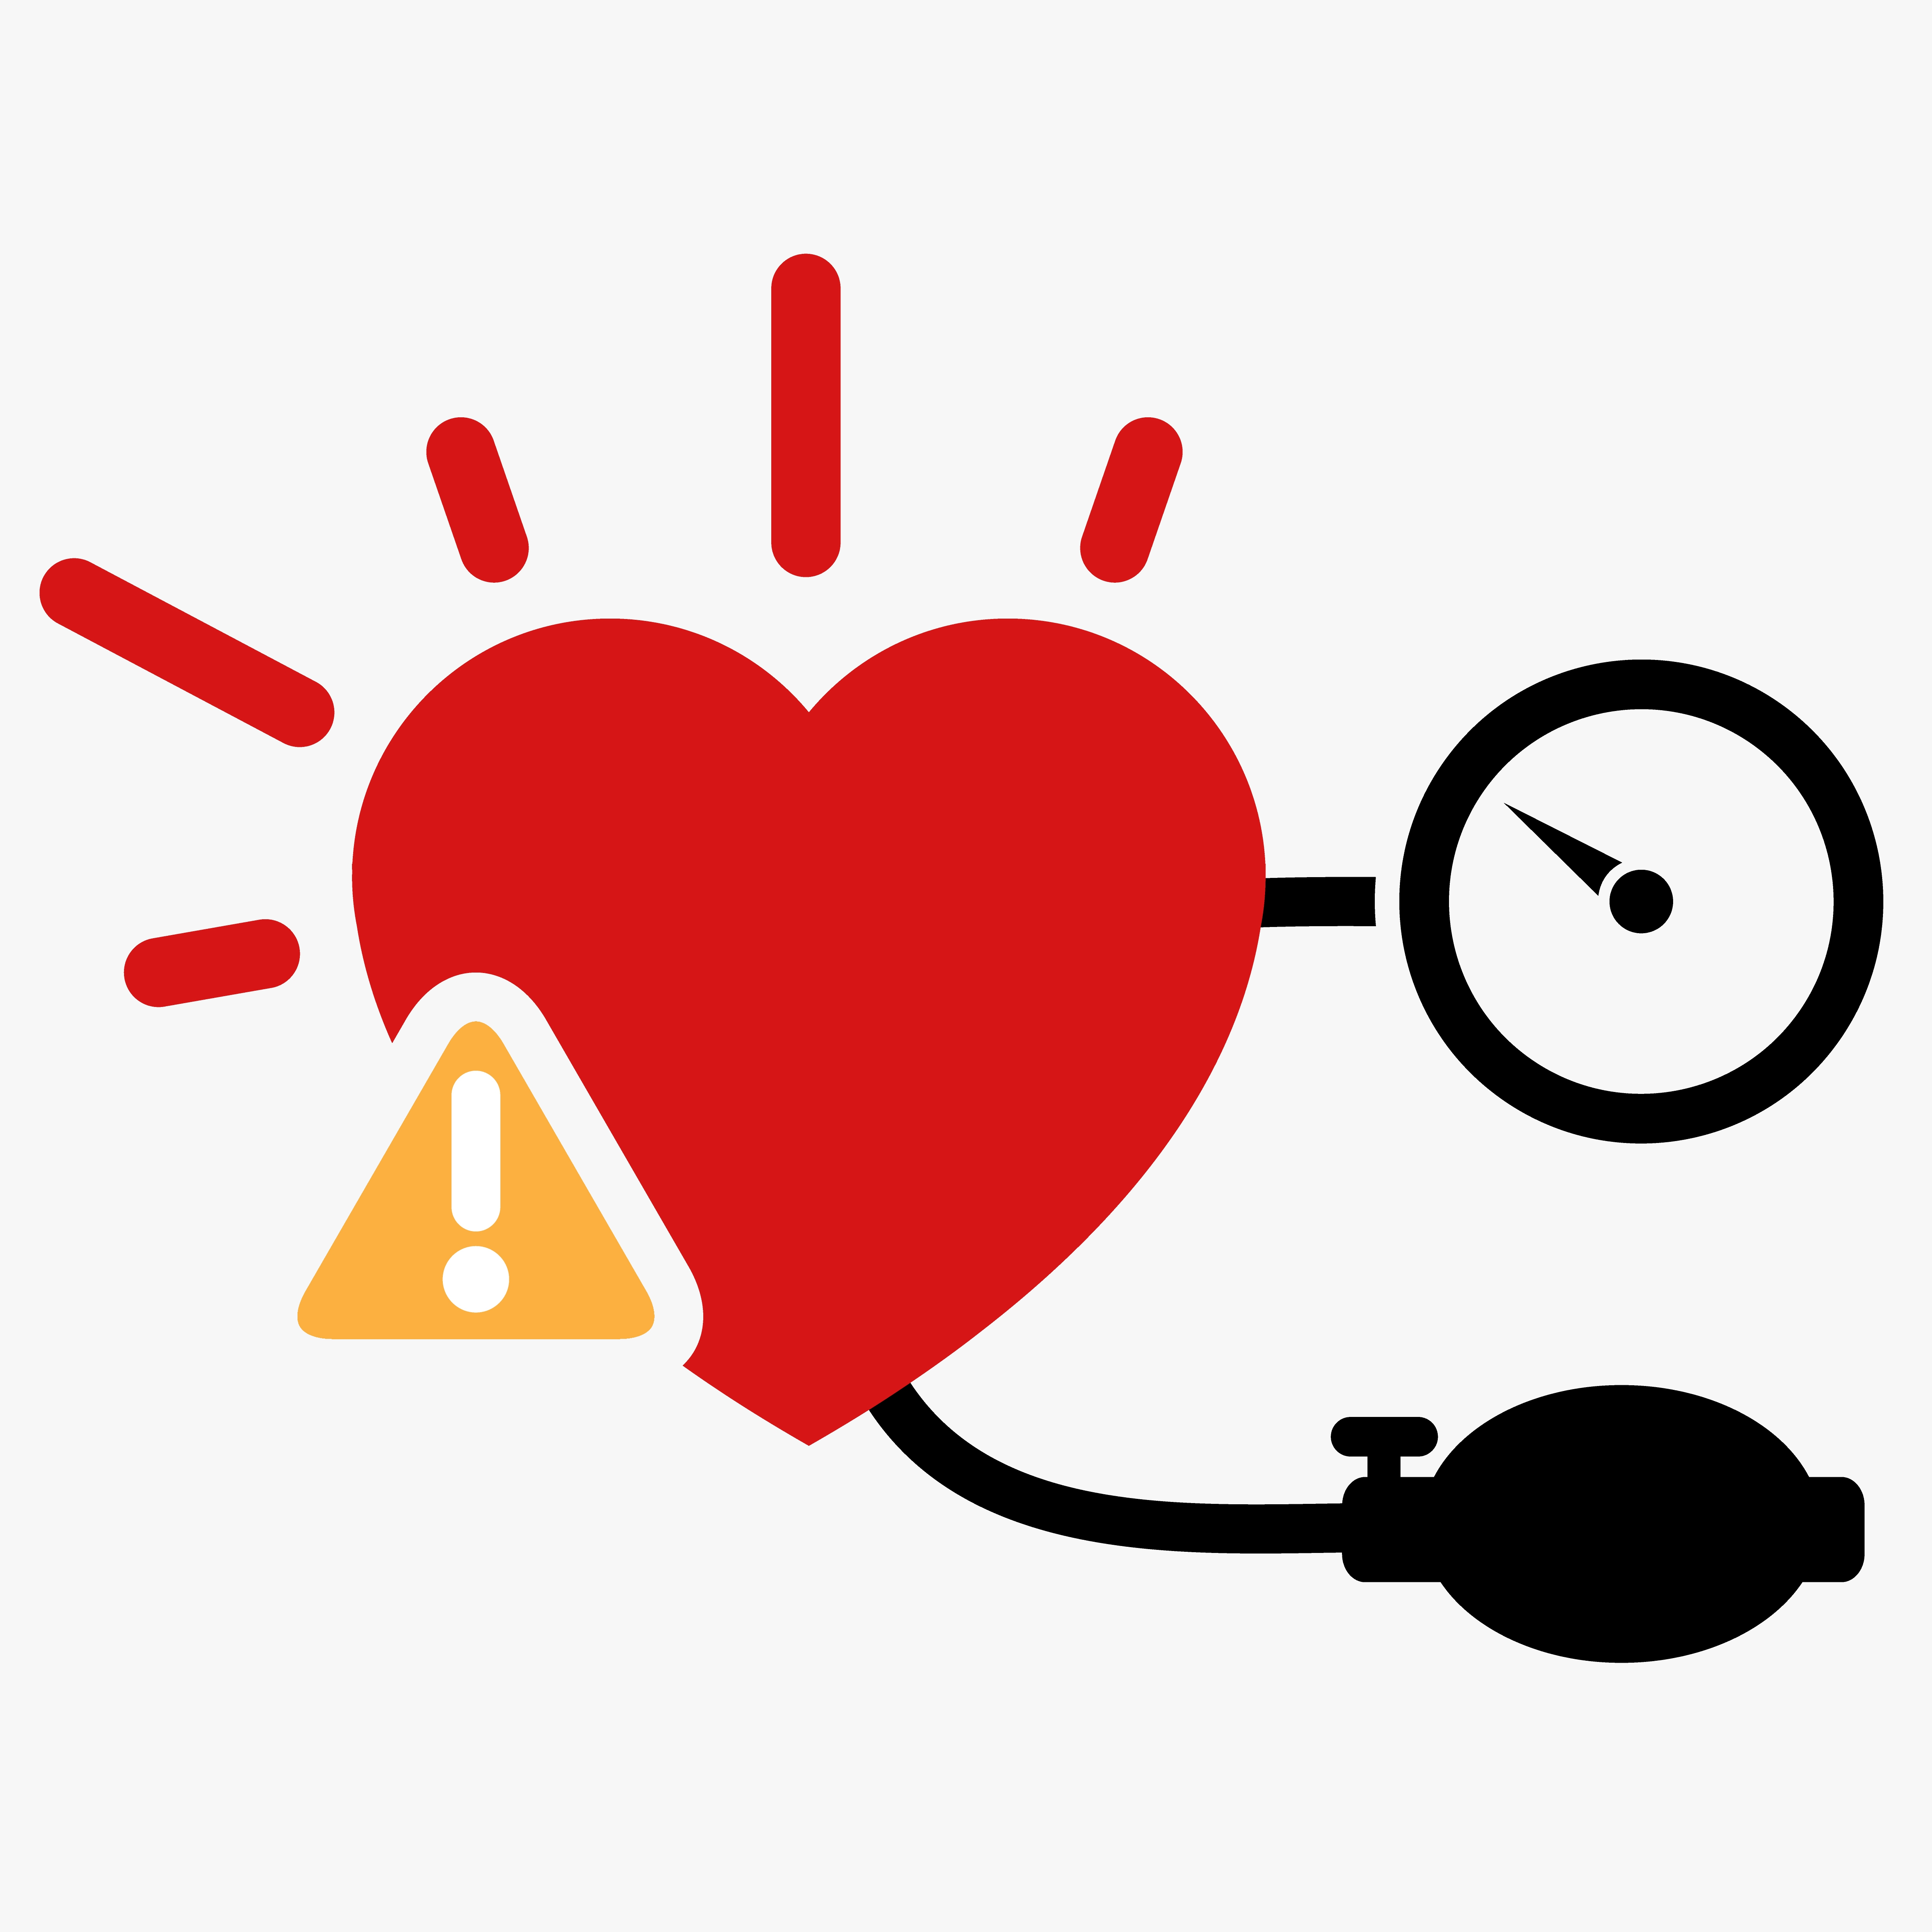 Illustration of a red heart with a sphygmomanometer indicating high blood pressure